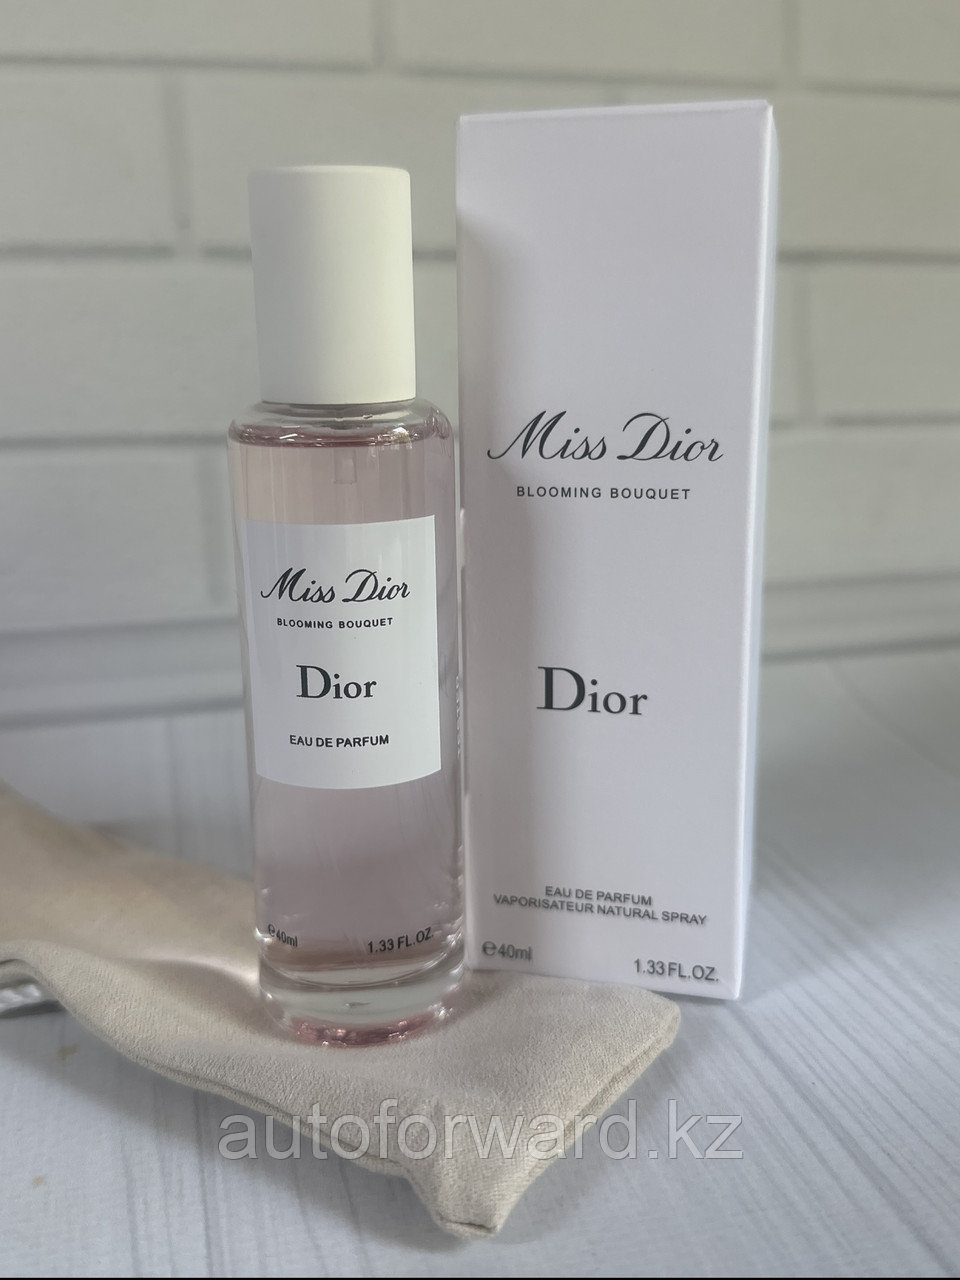 Miss Dior Blooming Bouquet, Тестер LUX 40 мл